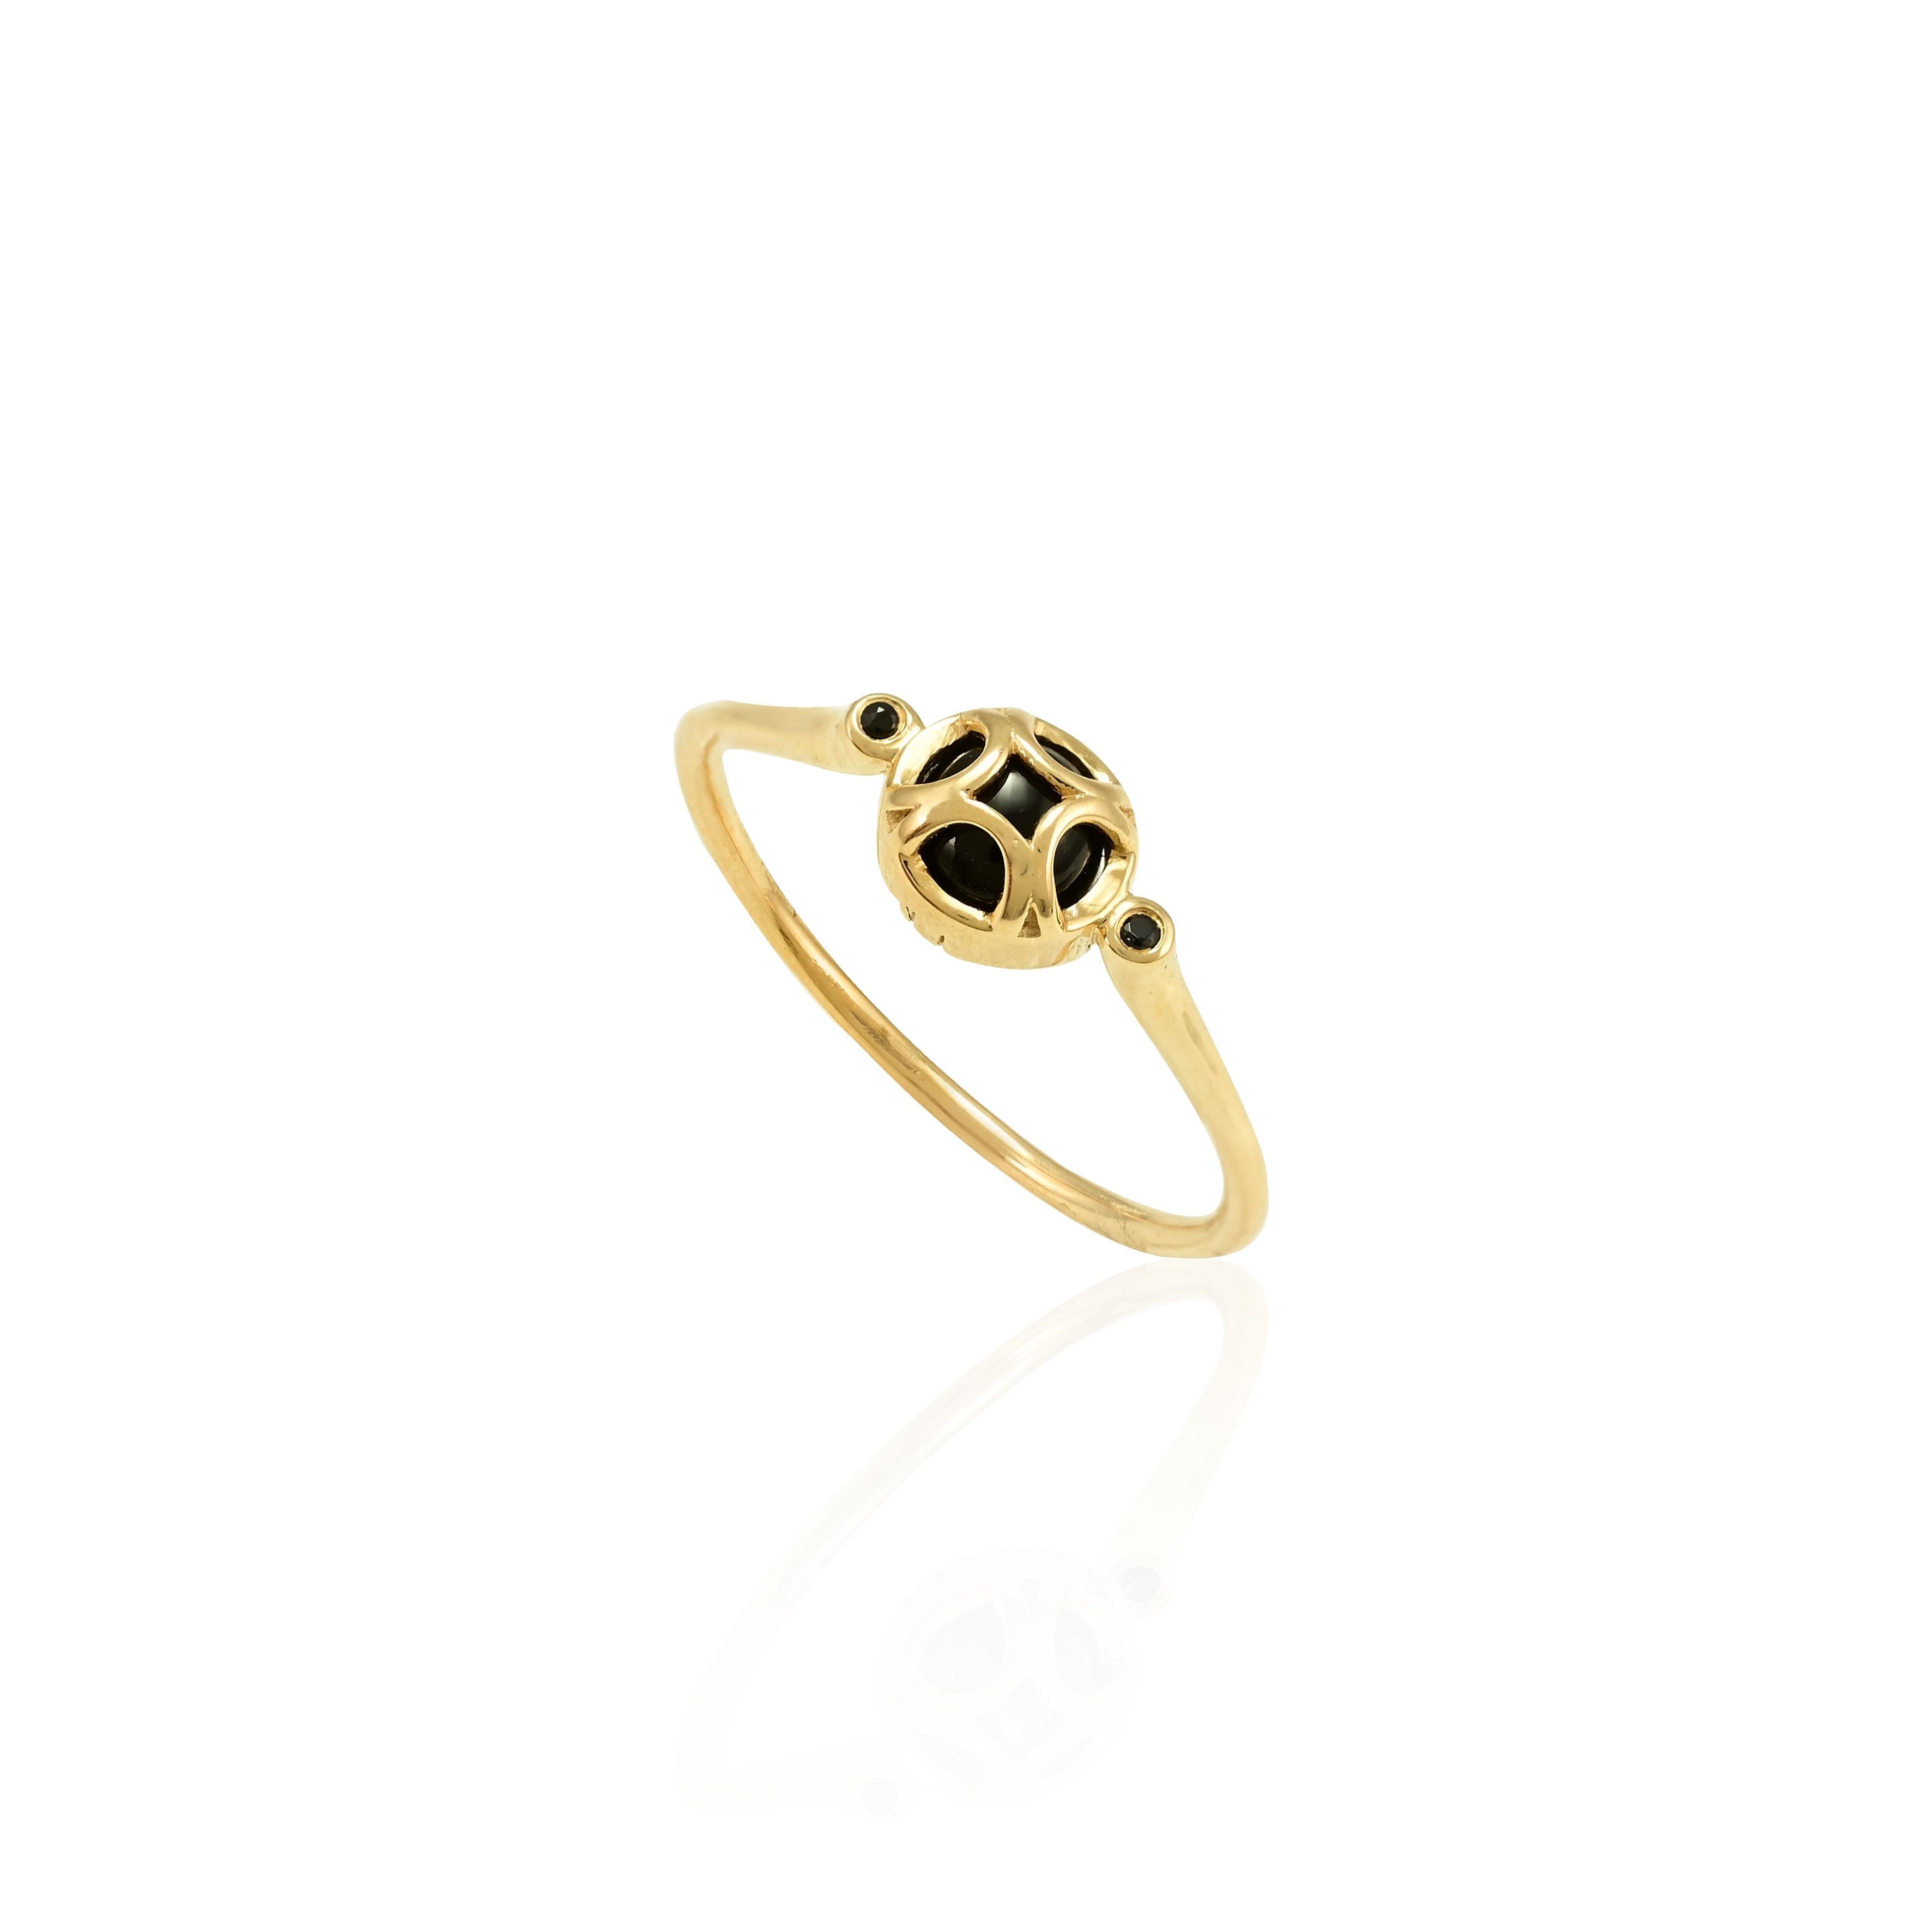 For Sale:  Unique 18k Solid Yellow Gold Dainty Black Onyx Gemstone Everyday Ring For Her 6